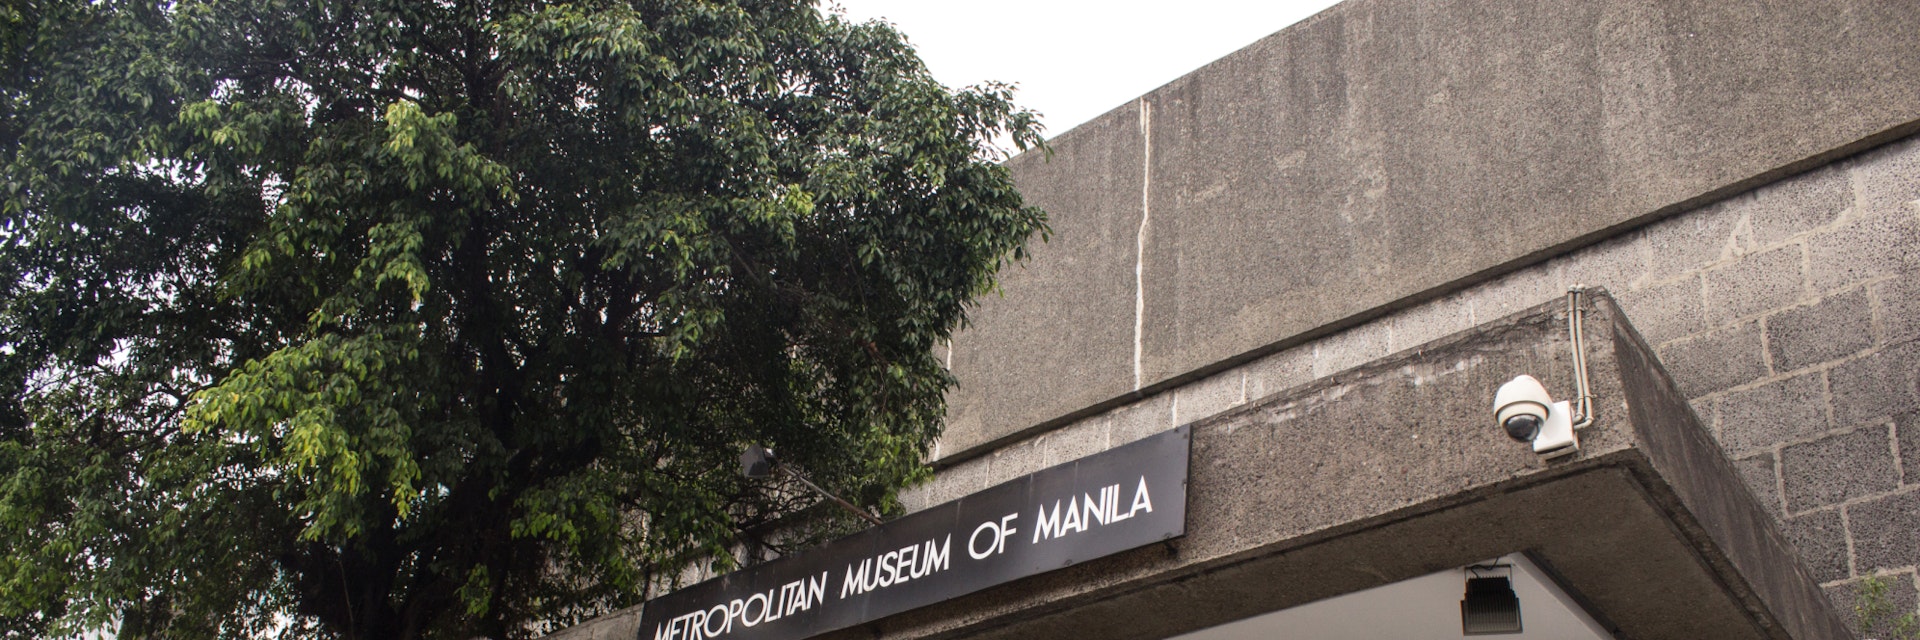 500px Photo ID: 133312595 - Established in 1976, the Metropolitan Museum of Manila is the first Philippine art institution to offer a bilingual and pedagogical program. It is partially subsidized by the Bangko Sentral ng Pilipinas (BSP or the Central Bank of the Philippines). In 1979 the 'Met' was incorporated into a foundation known as the Metropolitan Museum of Manila Foundation, Inc. officially changing the status of the Museum to an independent, private, nonsectarian, non-political and non-profit cultural foundation...The Museum is responsible for the conservation of some of the country's national treasures. The basement gallery showcases pre-Hispanic gold and pottery artifacts--proof of a flourishing pre-colonial Filipino society actively engaged in international trade and showcasing hallmarks of Filipino art and culture from the 8th to 13th centuries.